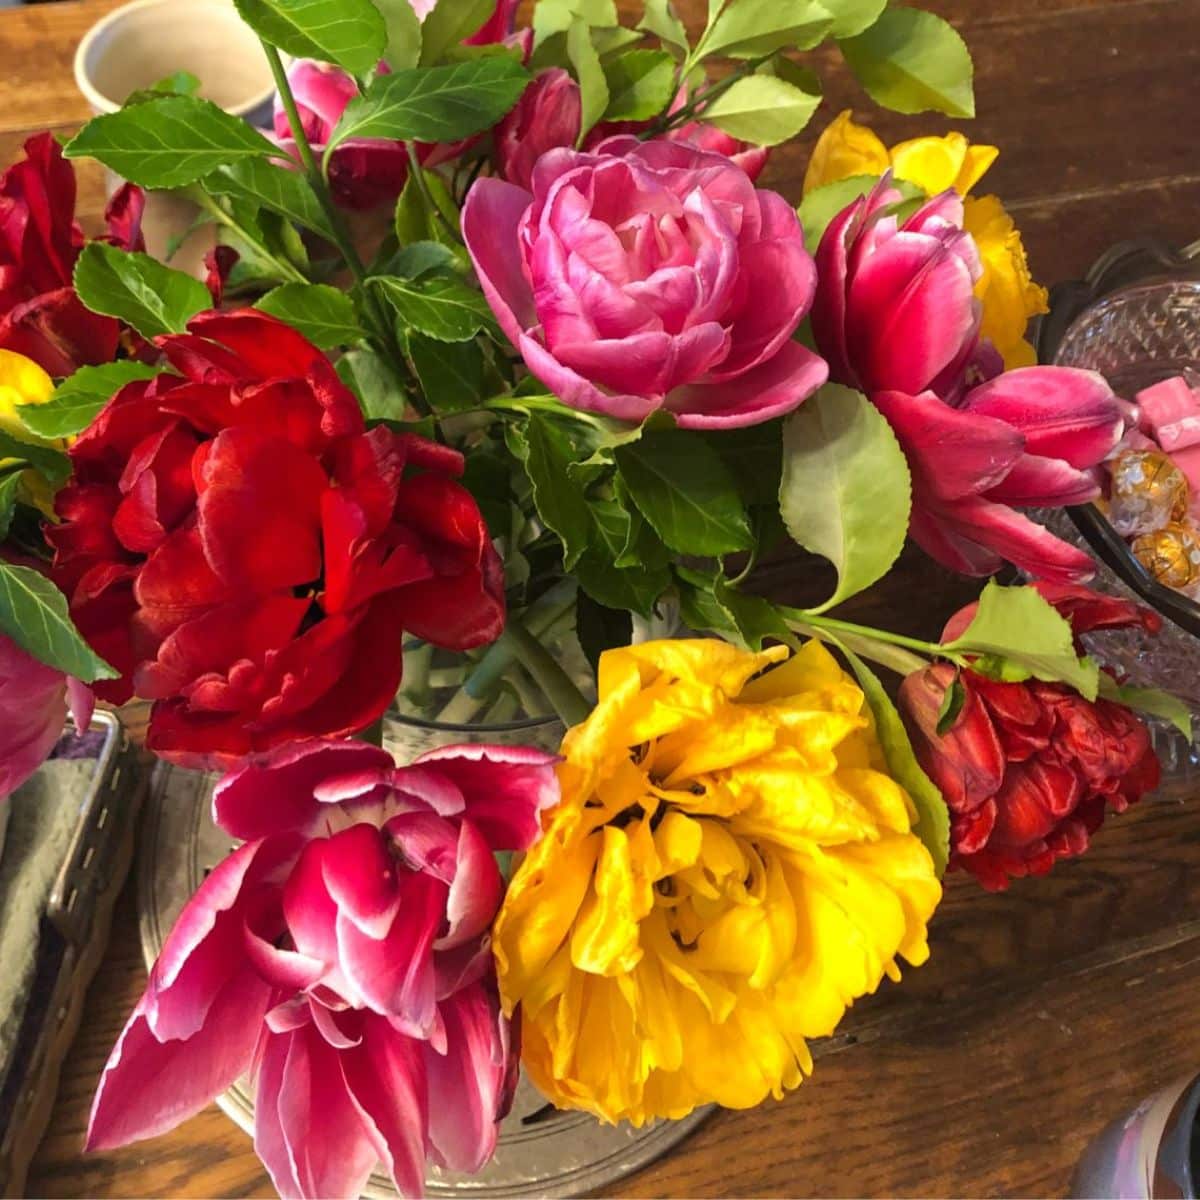 A colorful bouquet of fall flowers on a table.